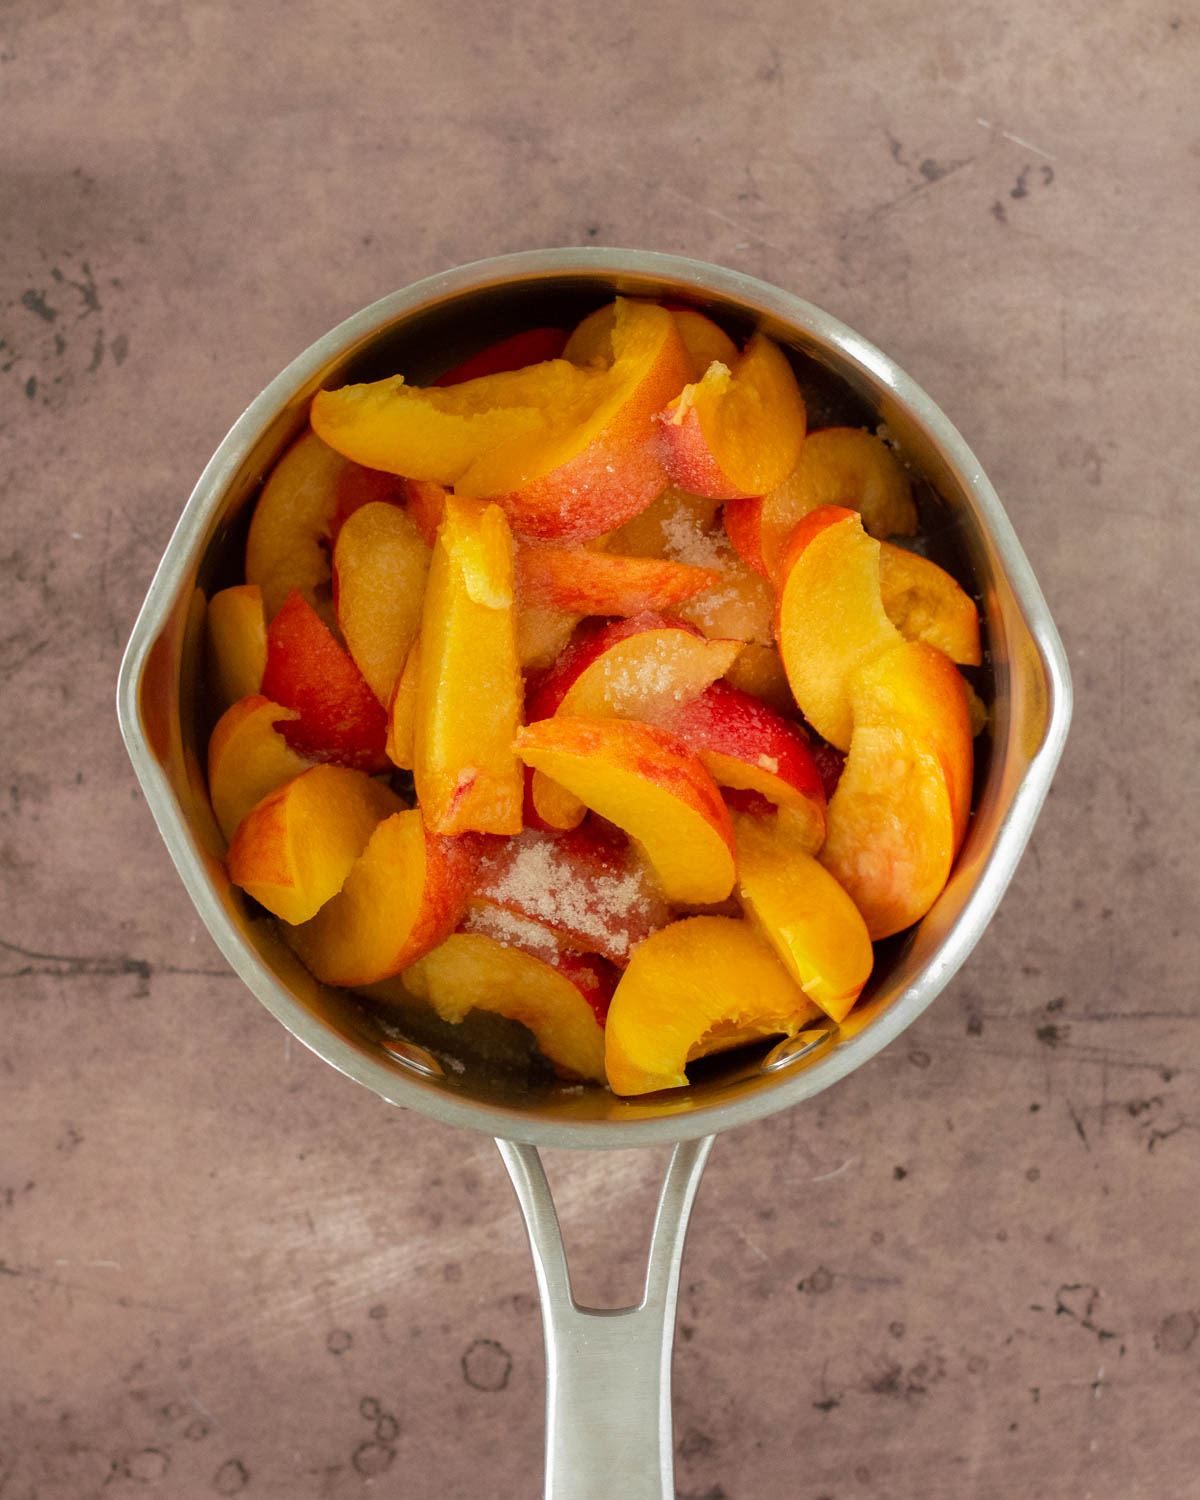 Step 1. Add the peaches and sugar to a pot